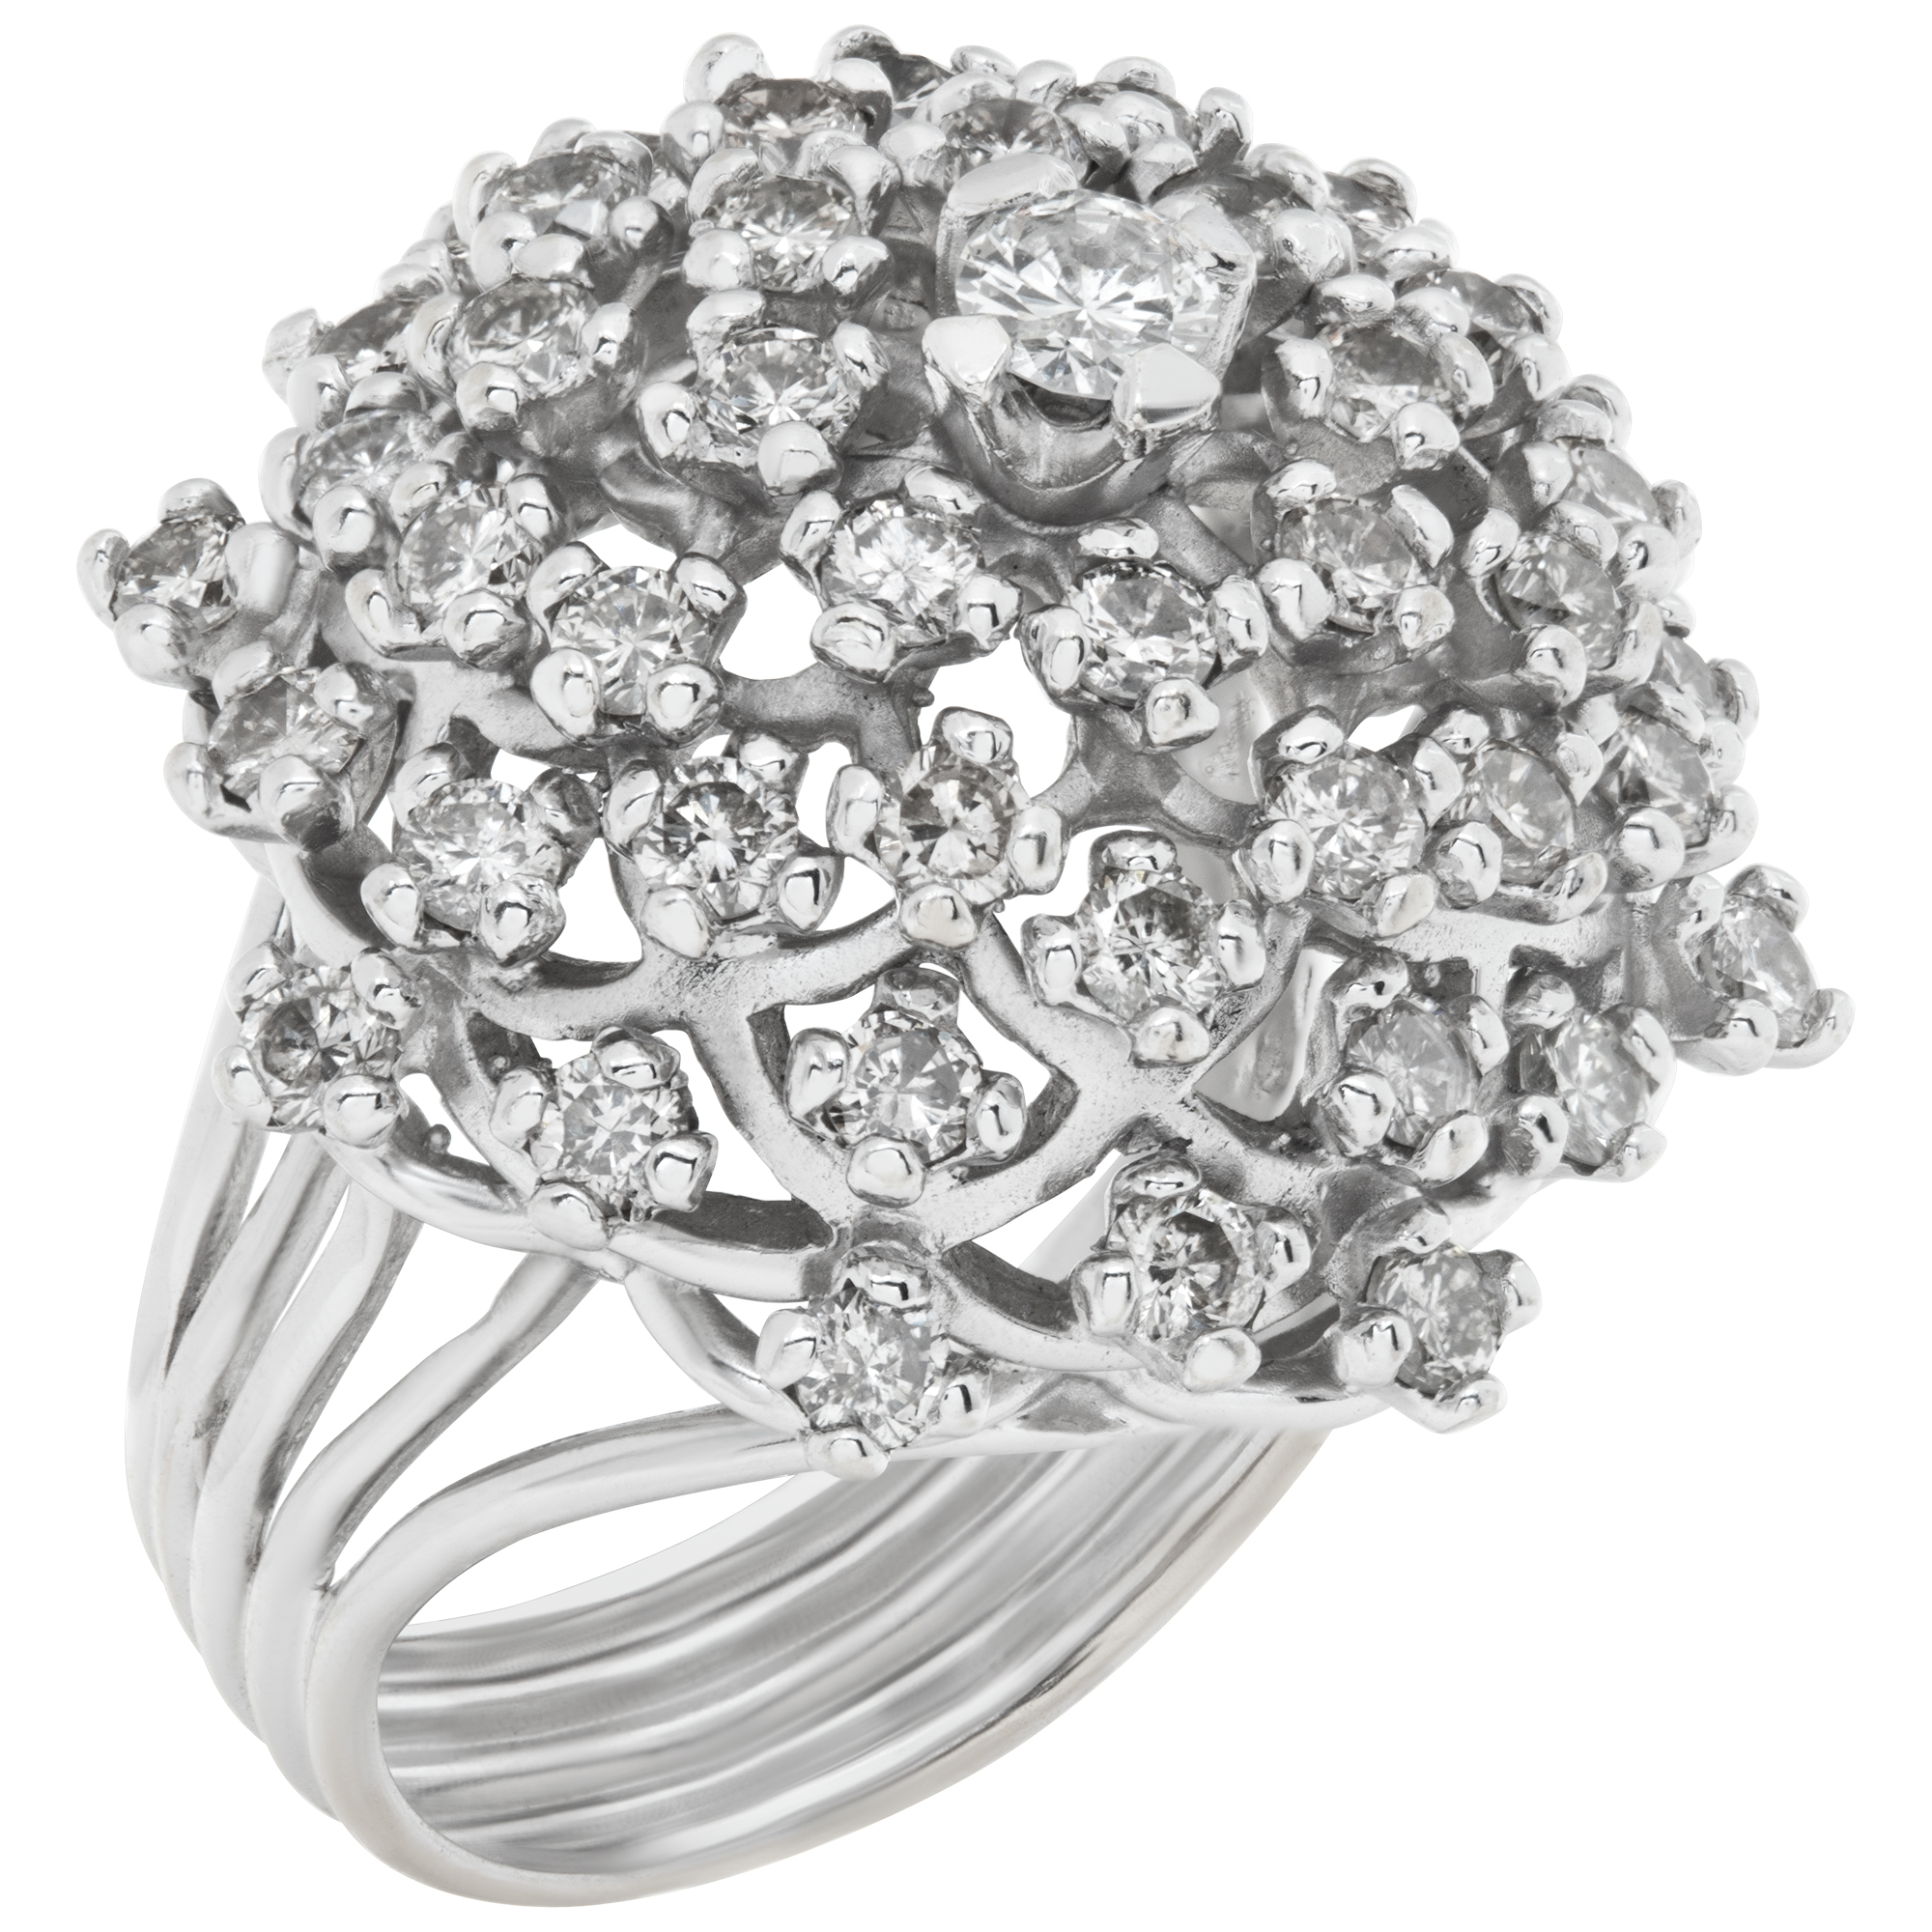 Diamond cluster ring in 18k white gold. 2.00 carats in diamonds. Size 6.5. image 3